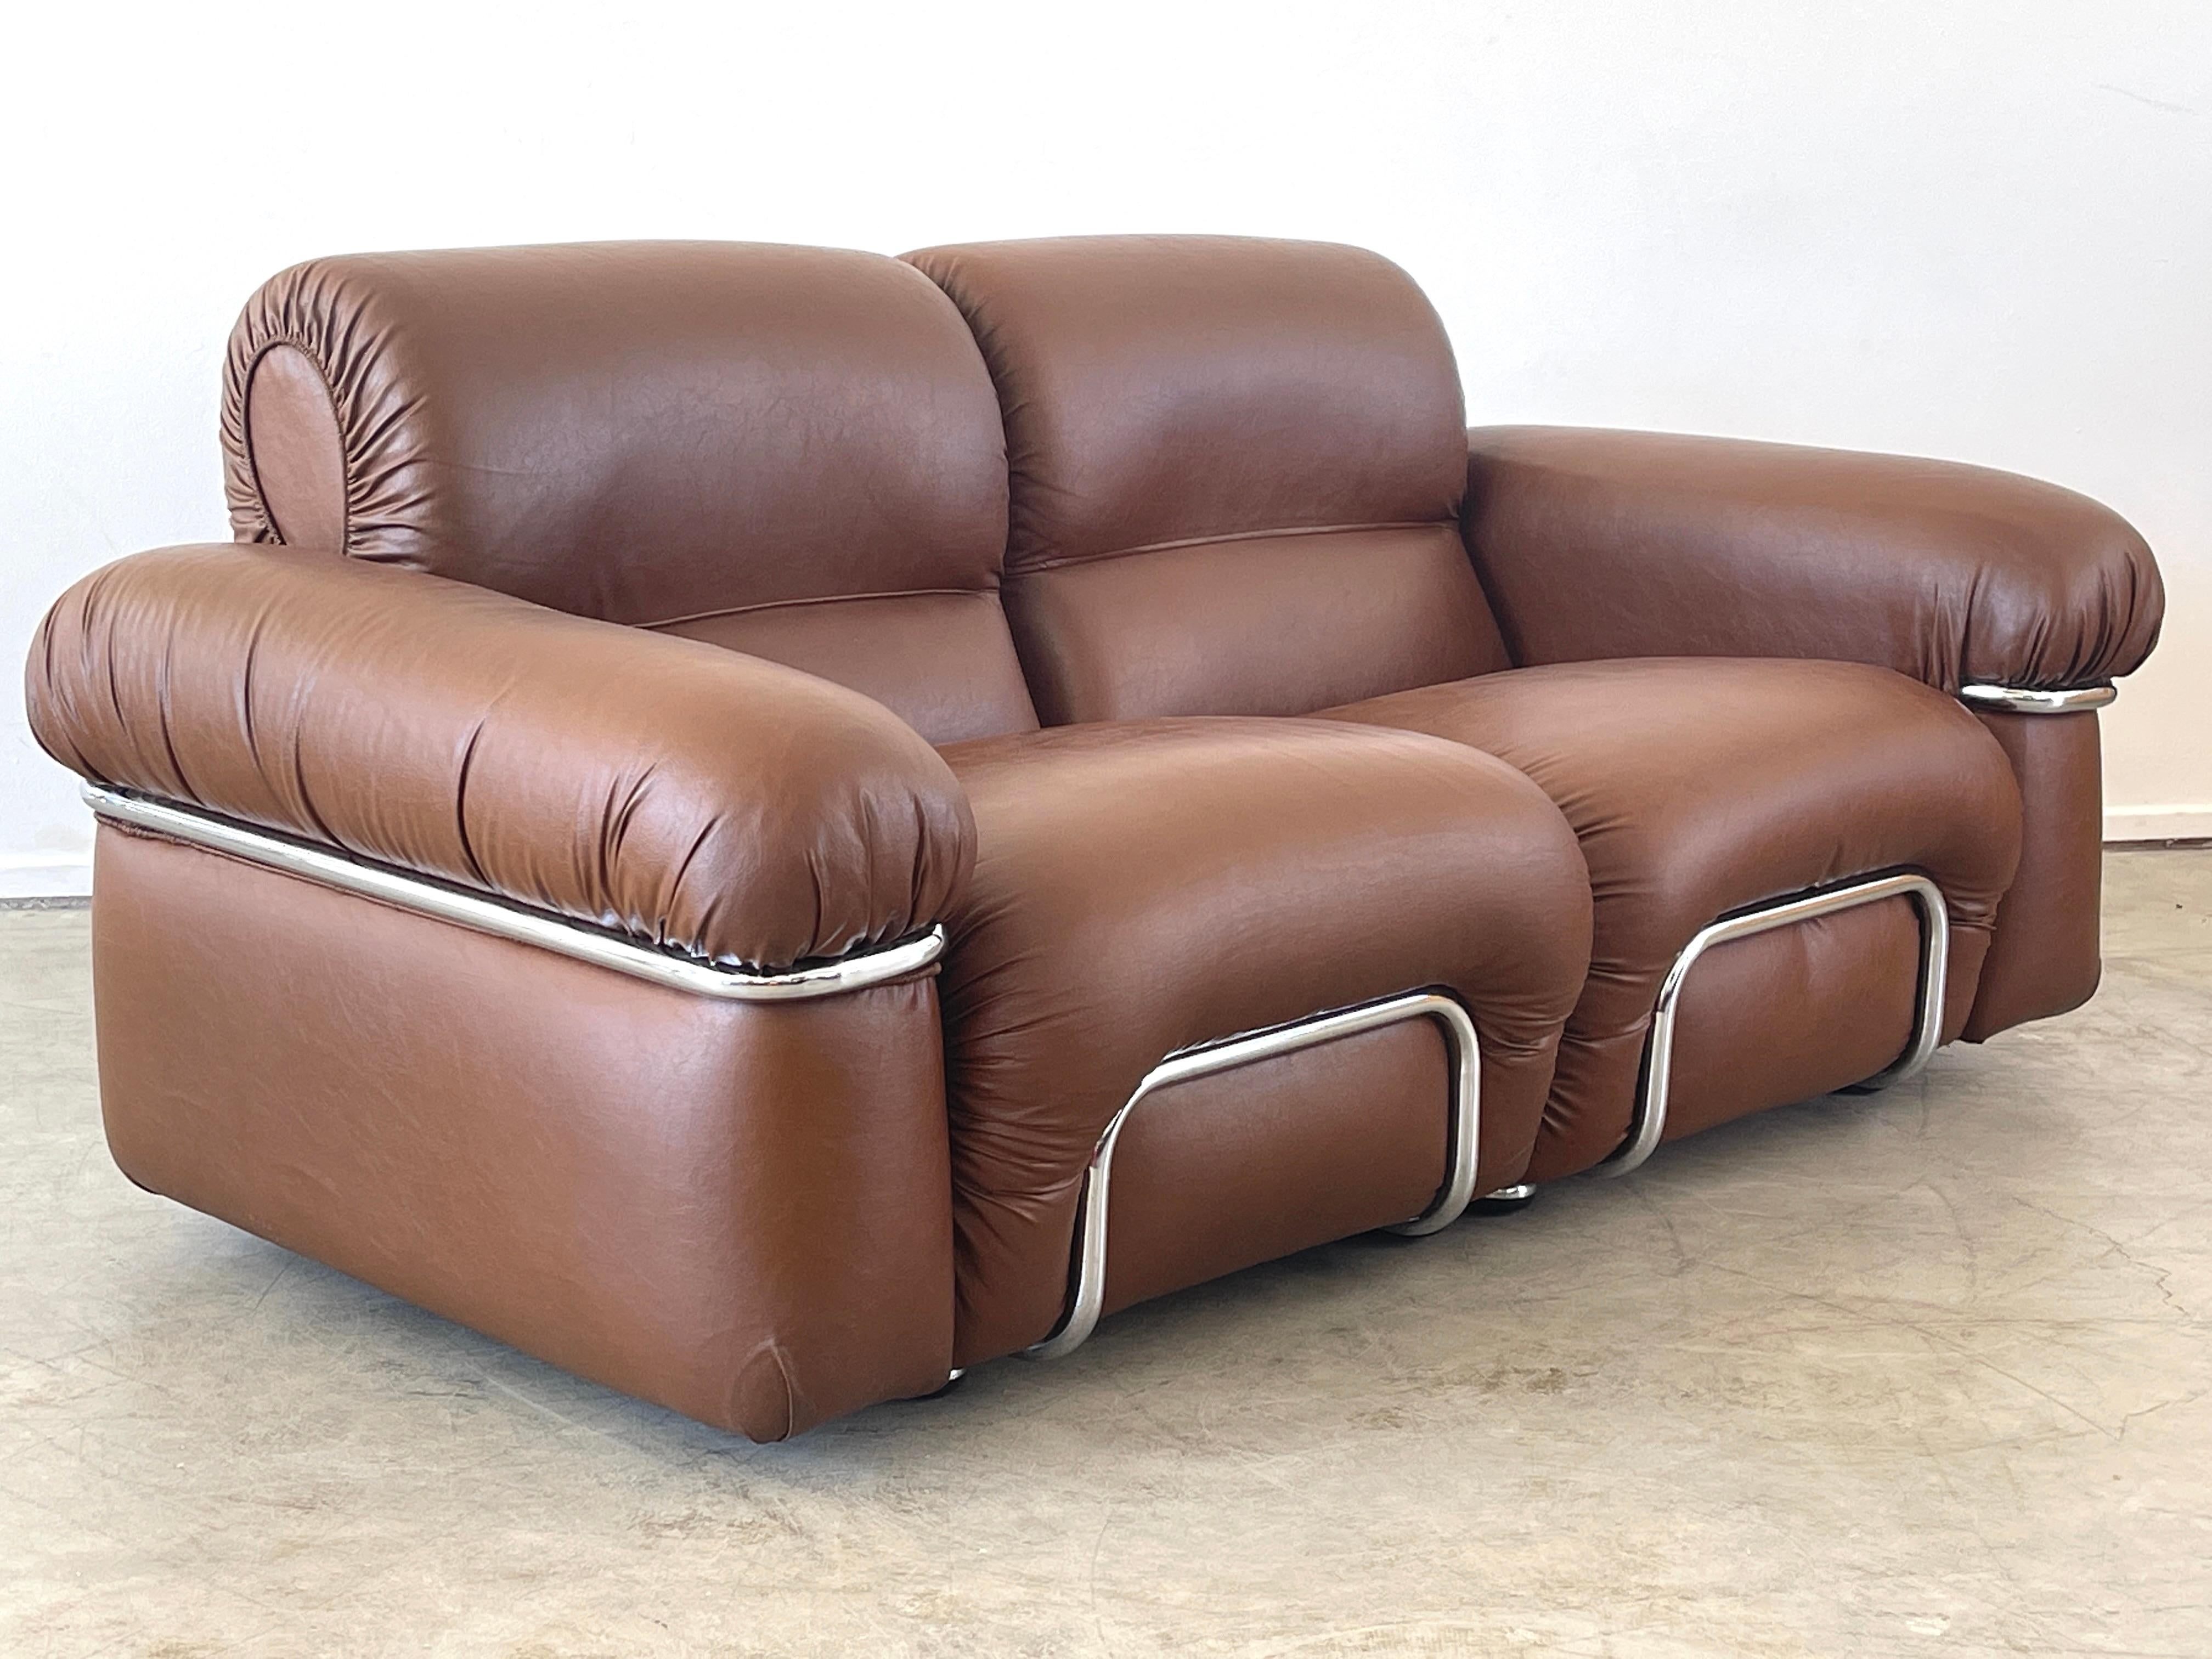 Handsome Adriano Piazzessi Italian leather loveseat / sofa with curved tufted sides and chrome detailing. Wonderful chocolate brown leather with tacking hardware along back. 
Italy, 1970's.